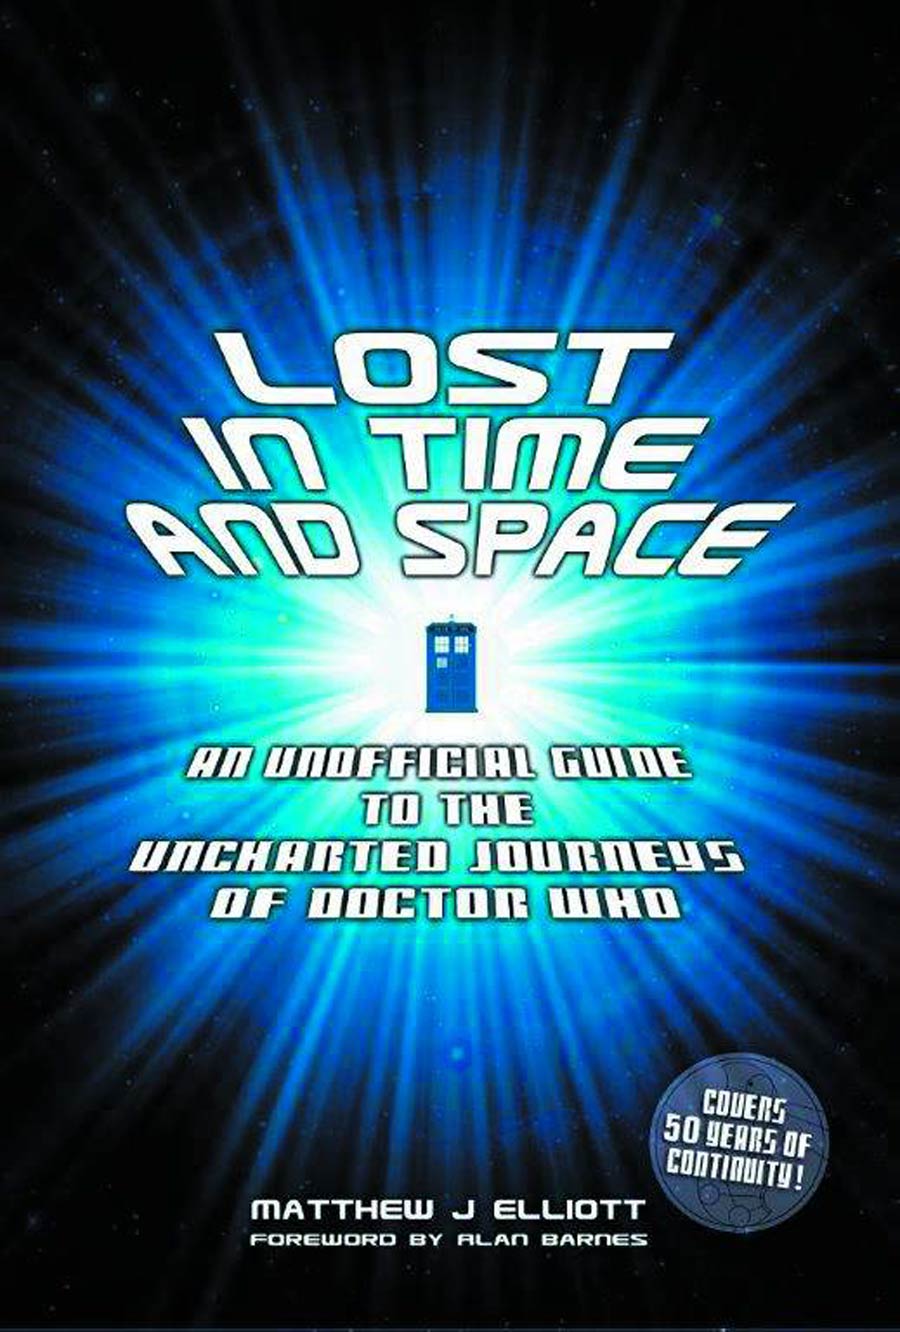 Lost In Time And Space An Unofficial Guide To The Uncharted Journeys Of Doctor Who SC